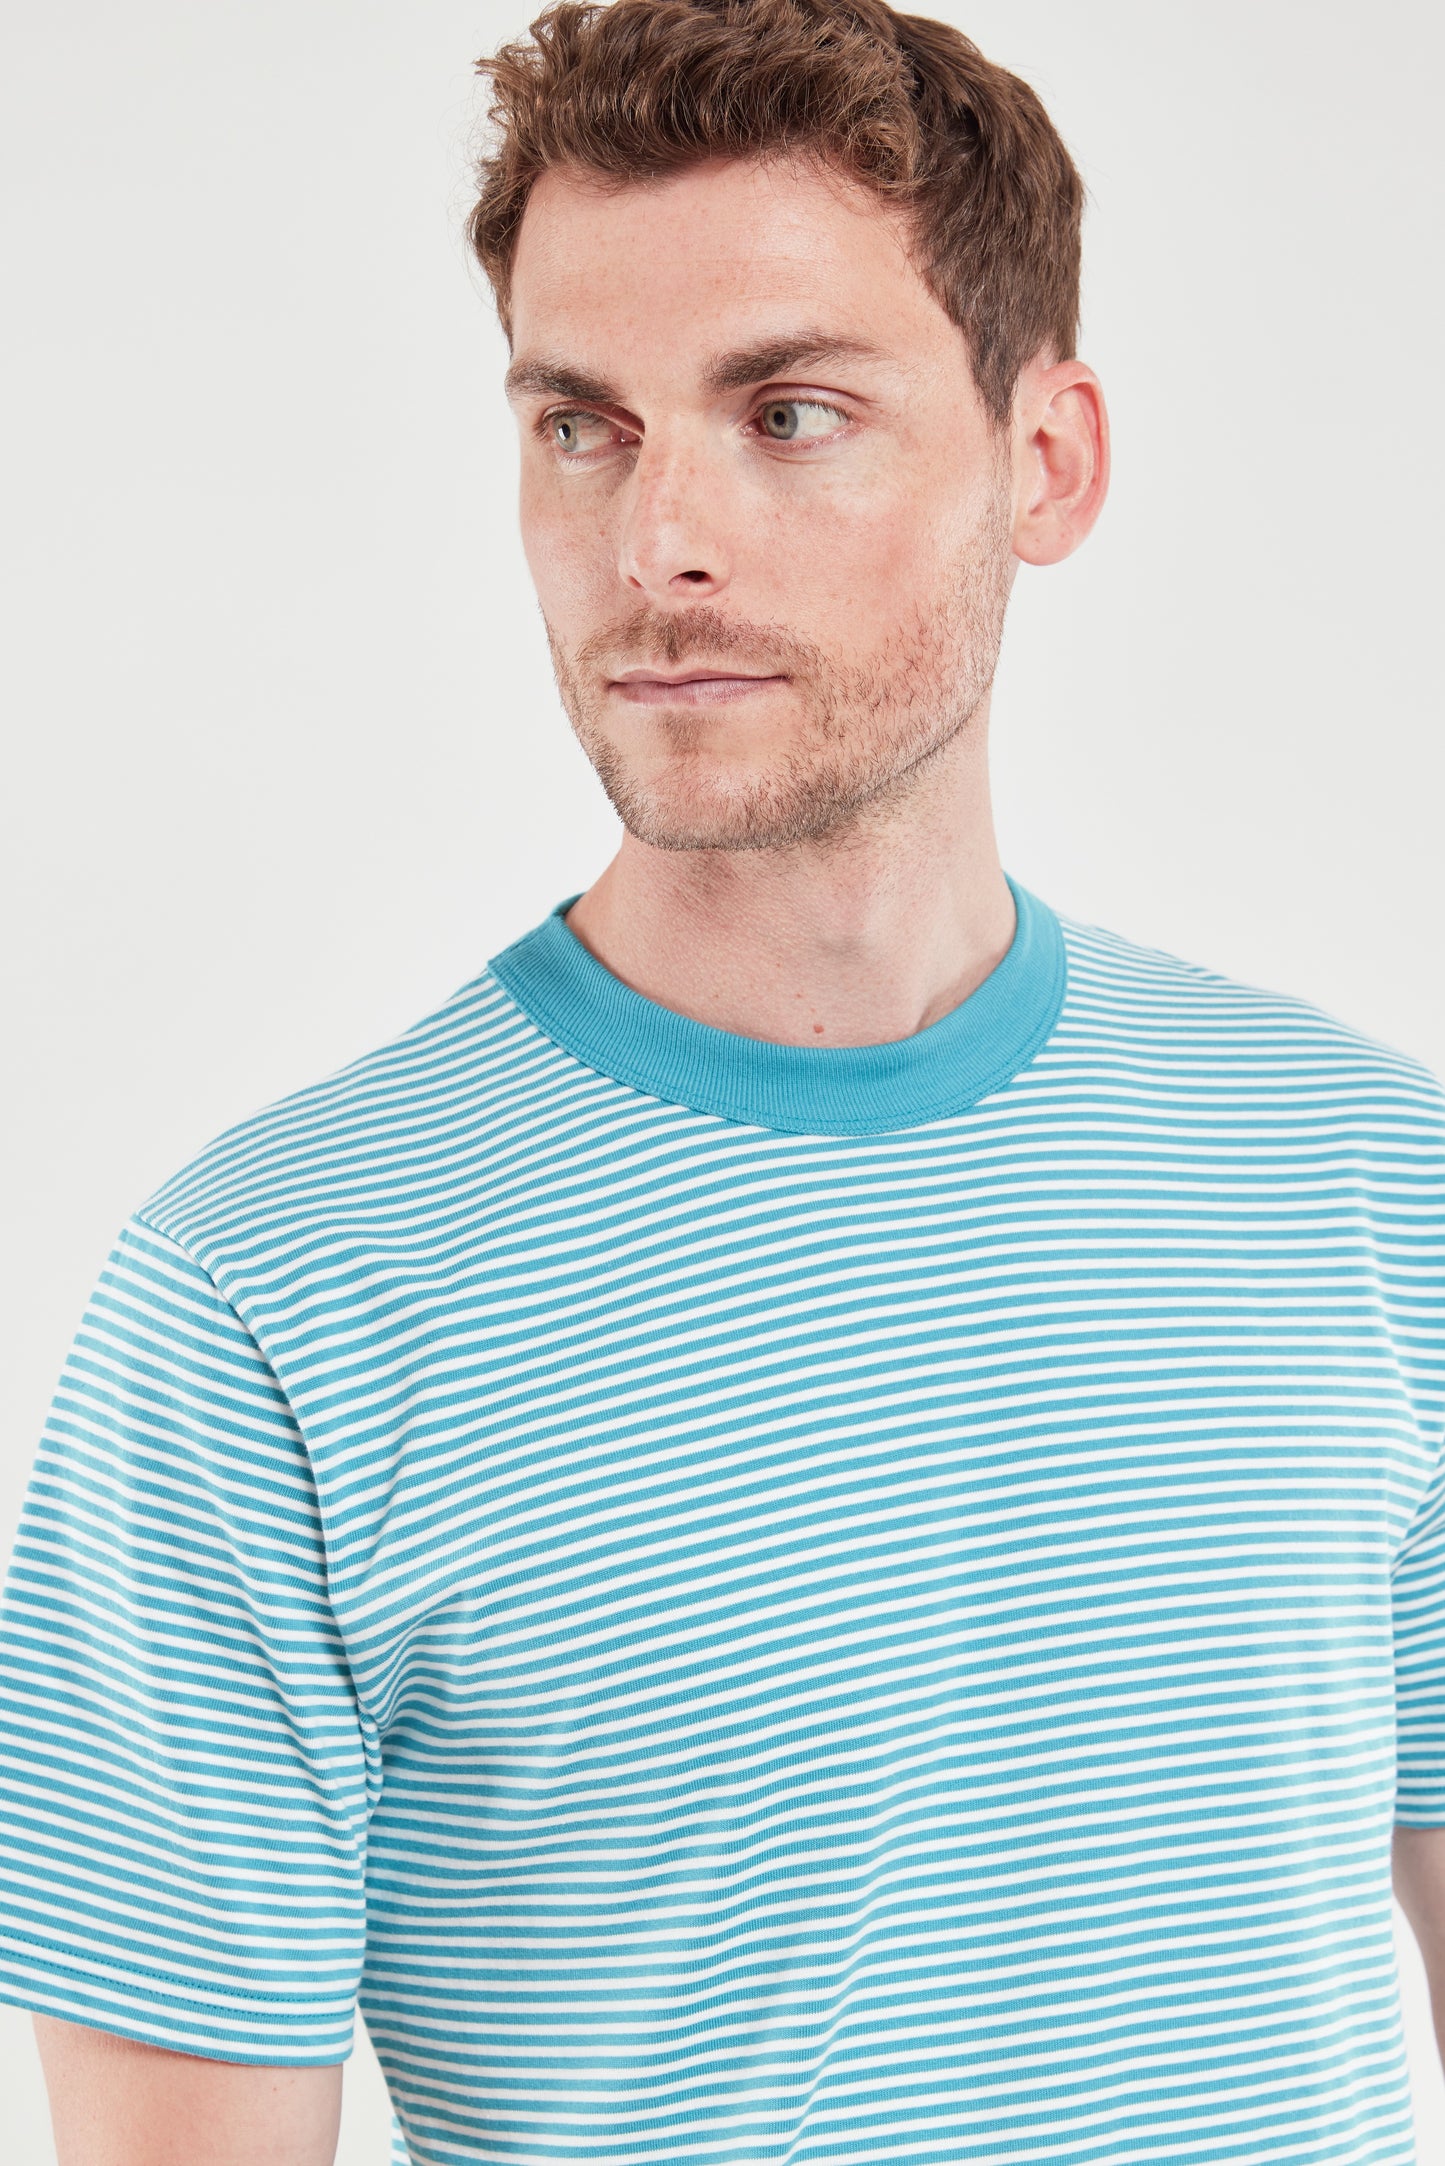 Armor Lux Striped Heritage Short Sleeve Striped T-Shirt in pagoda aqua blue and milk